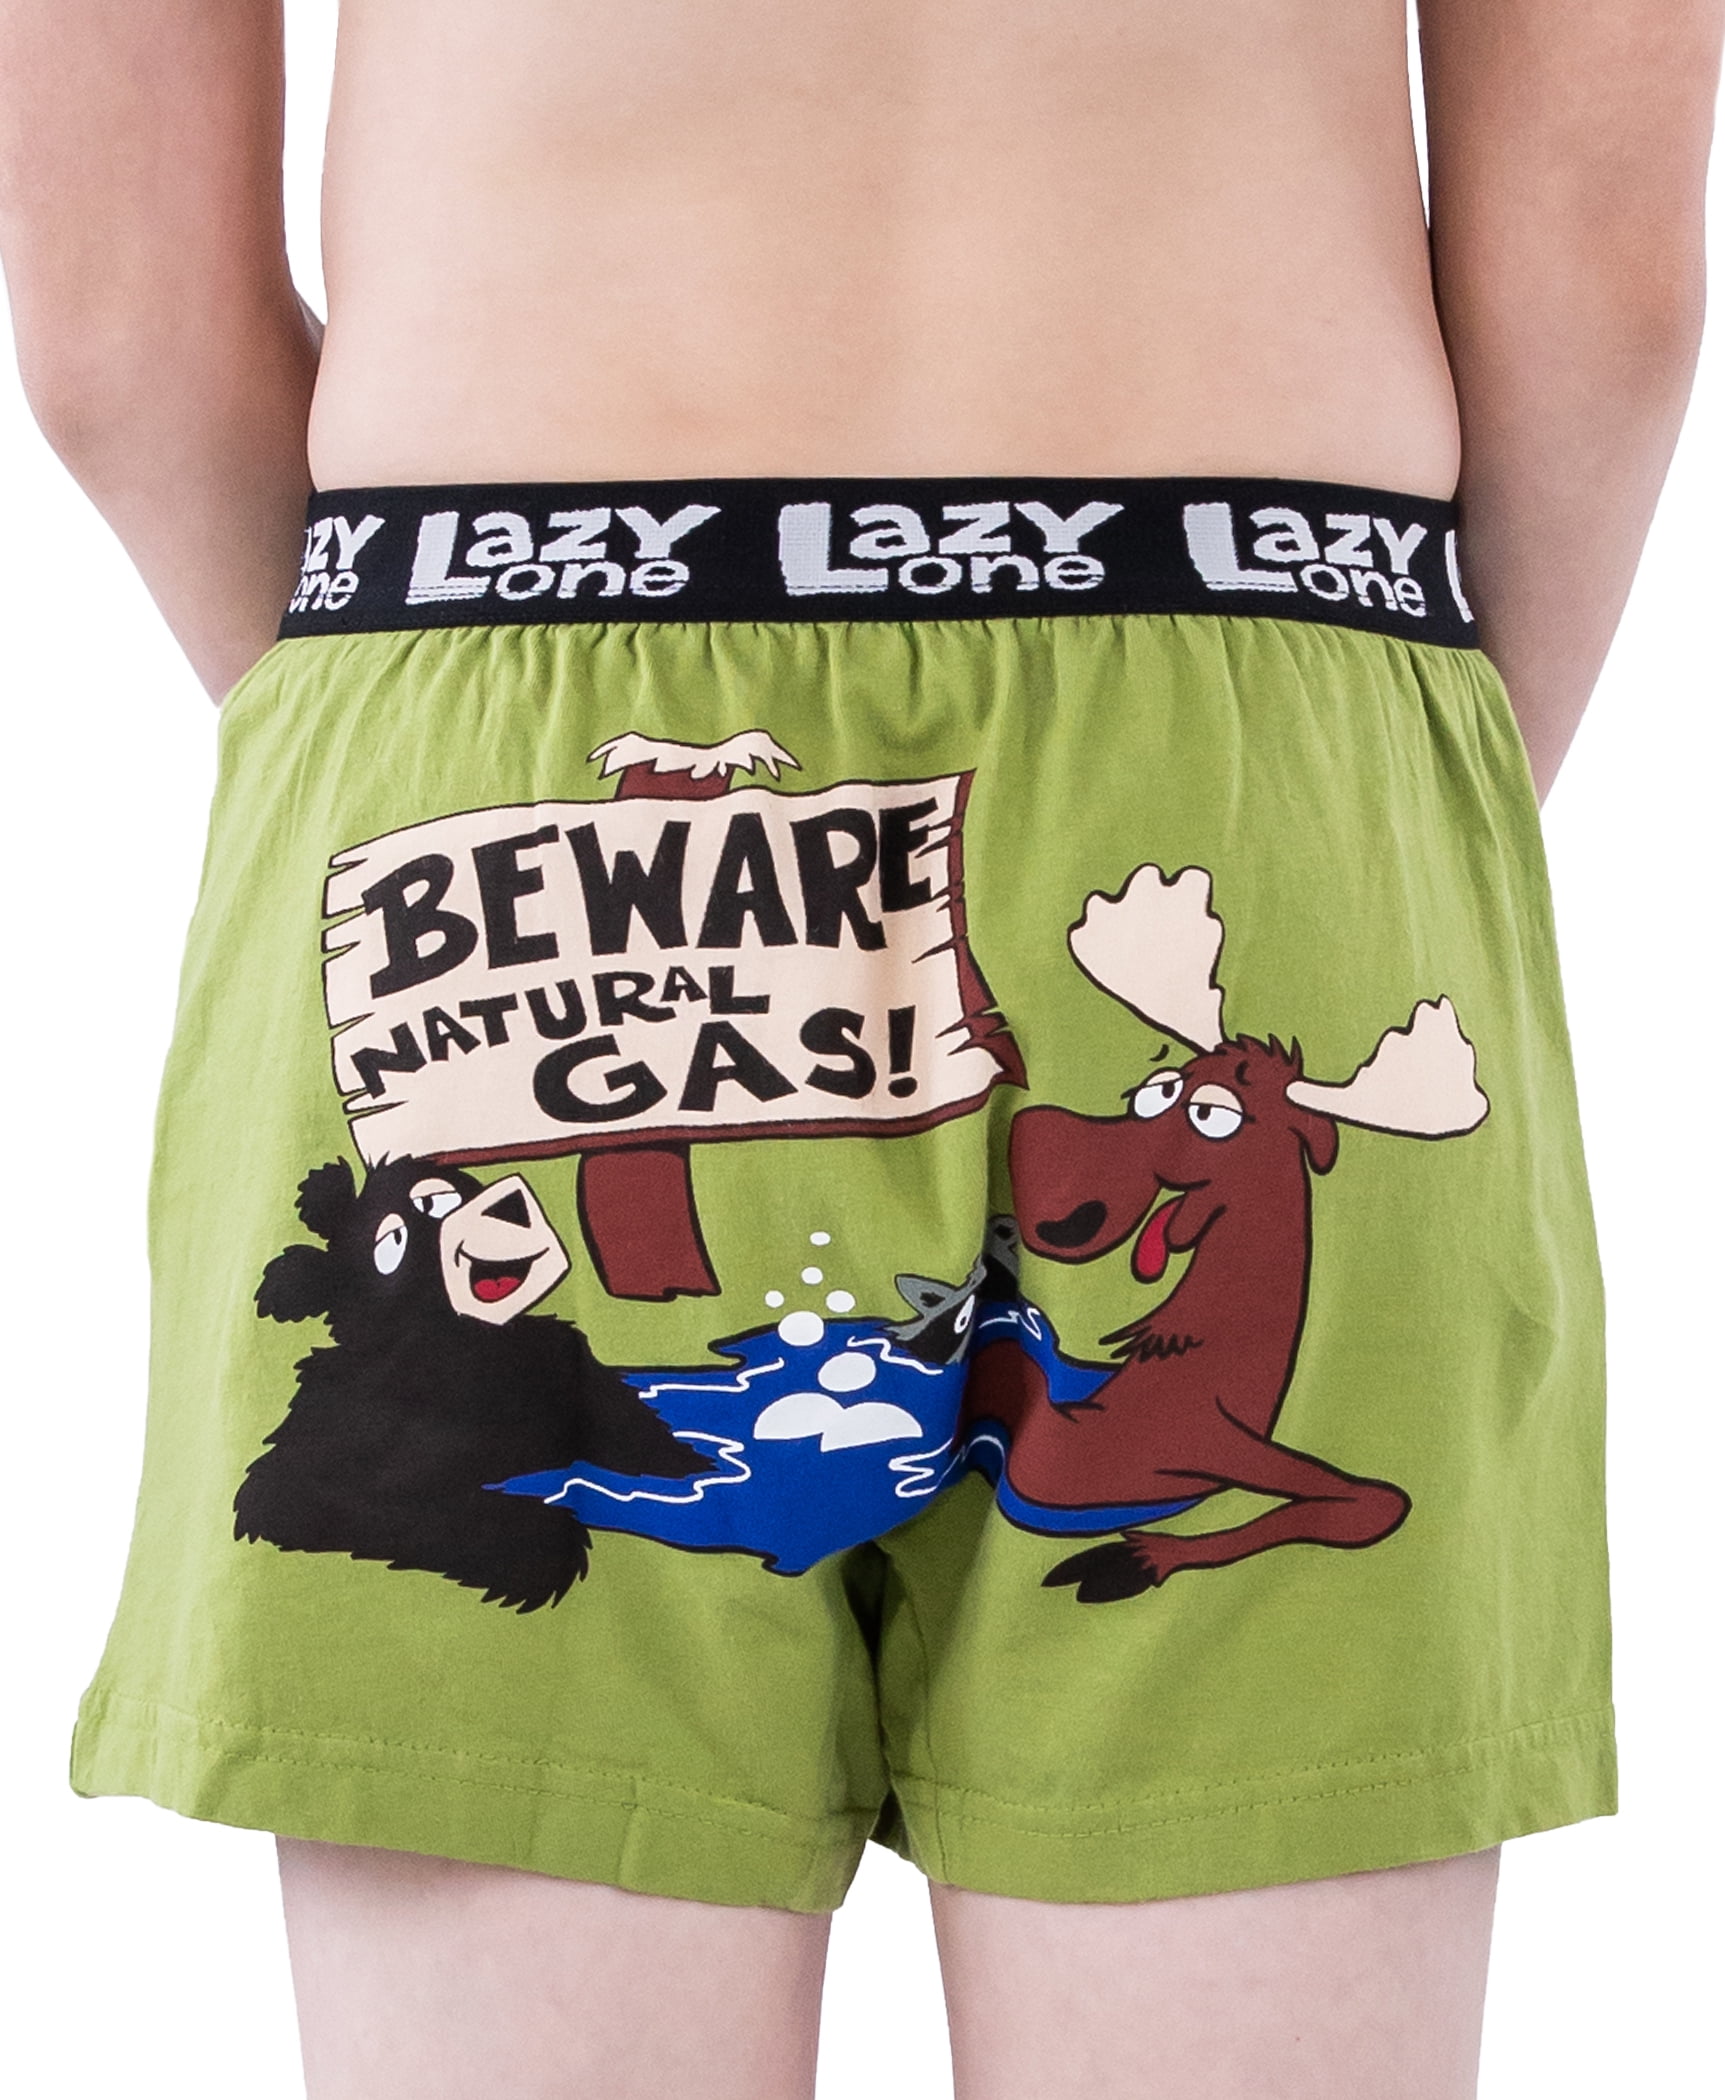 Don't Moose With Me Men's Funny Boxers